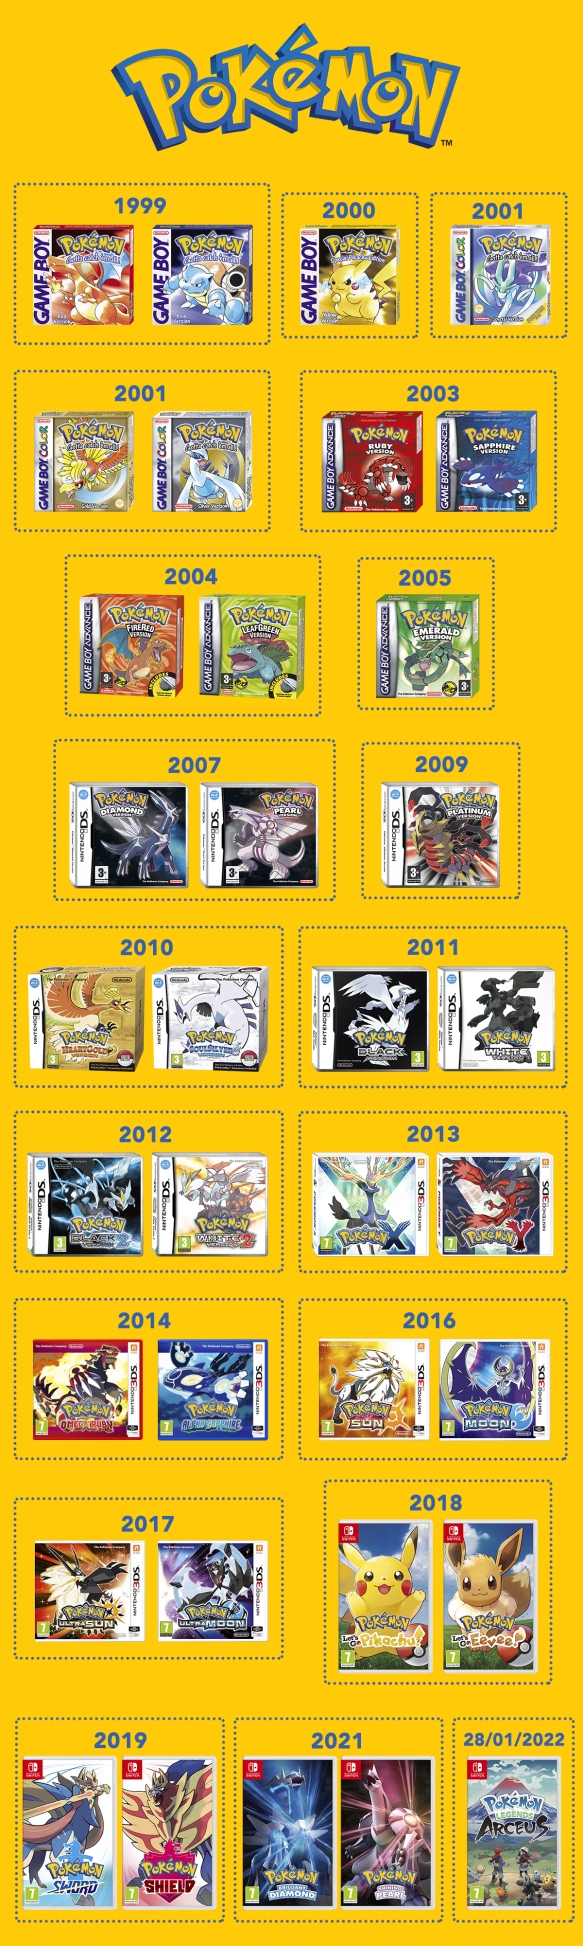 All Pokémon games in order